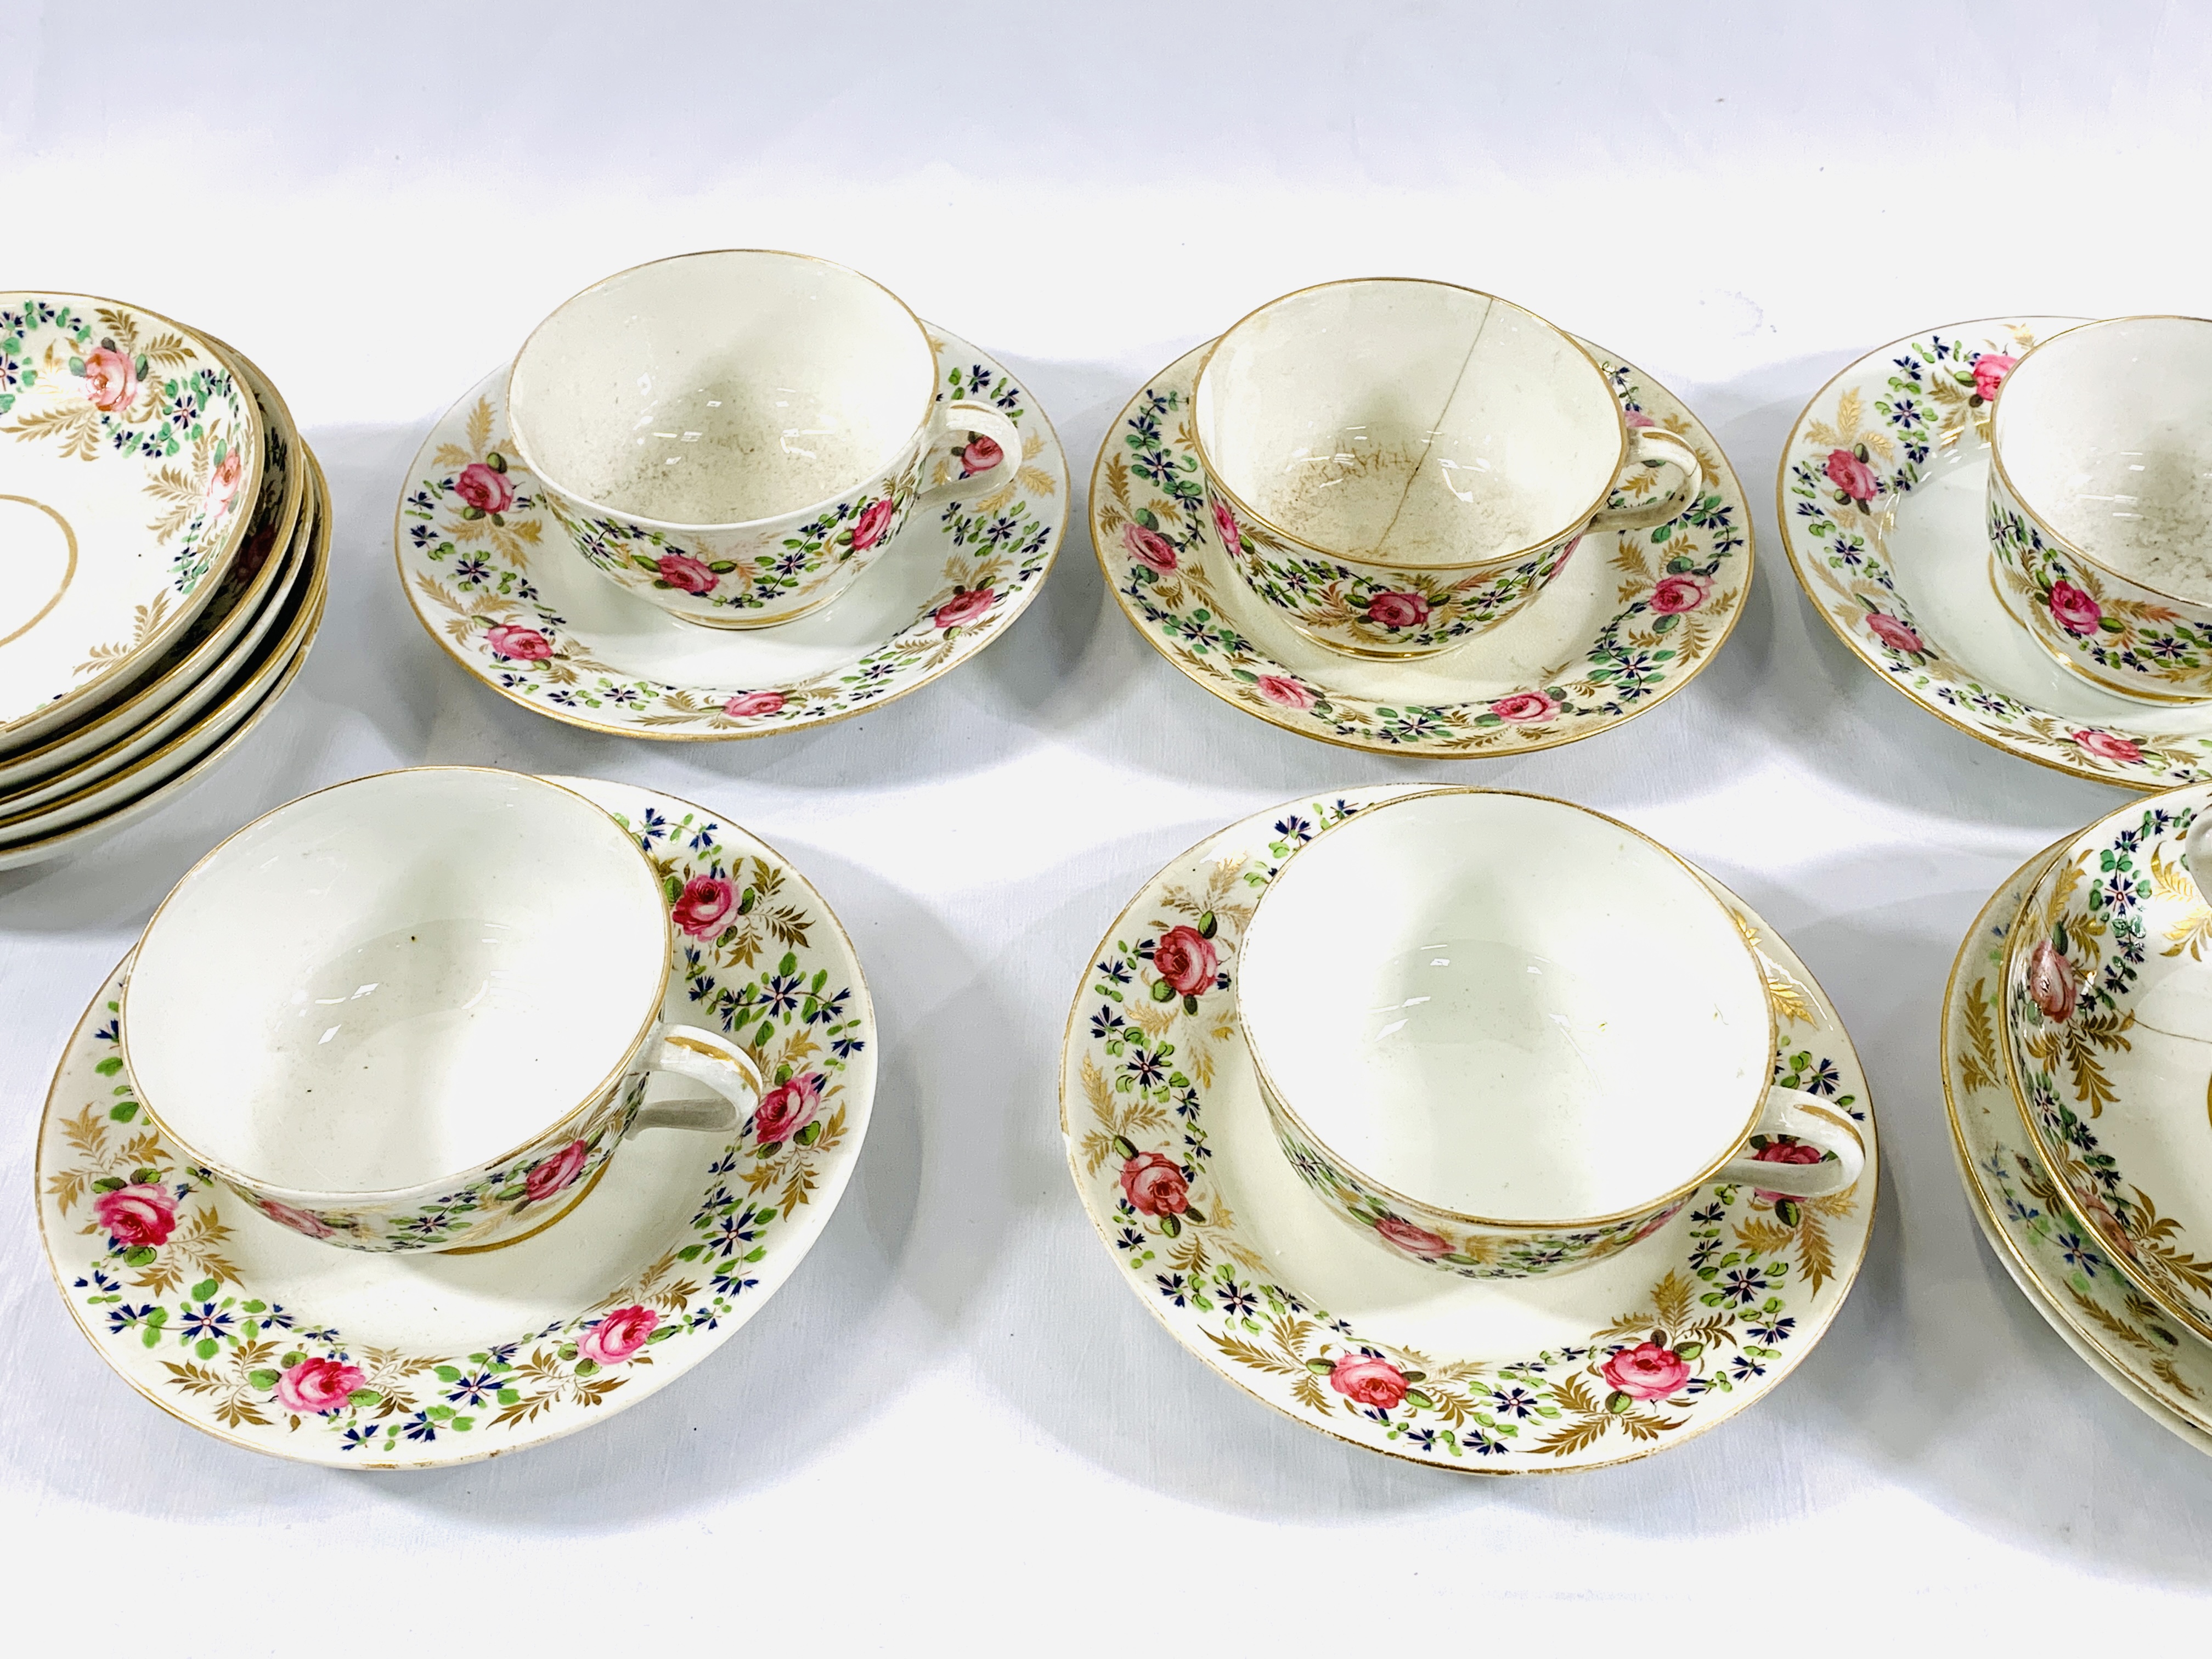 Crown Derby tea cups and saucers - Image 4 of 4